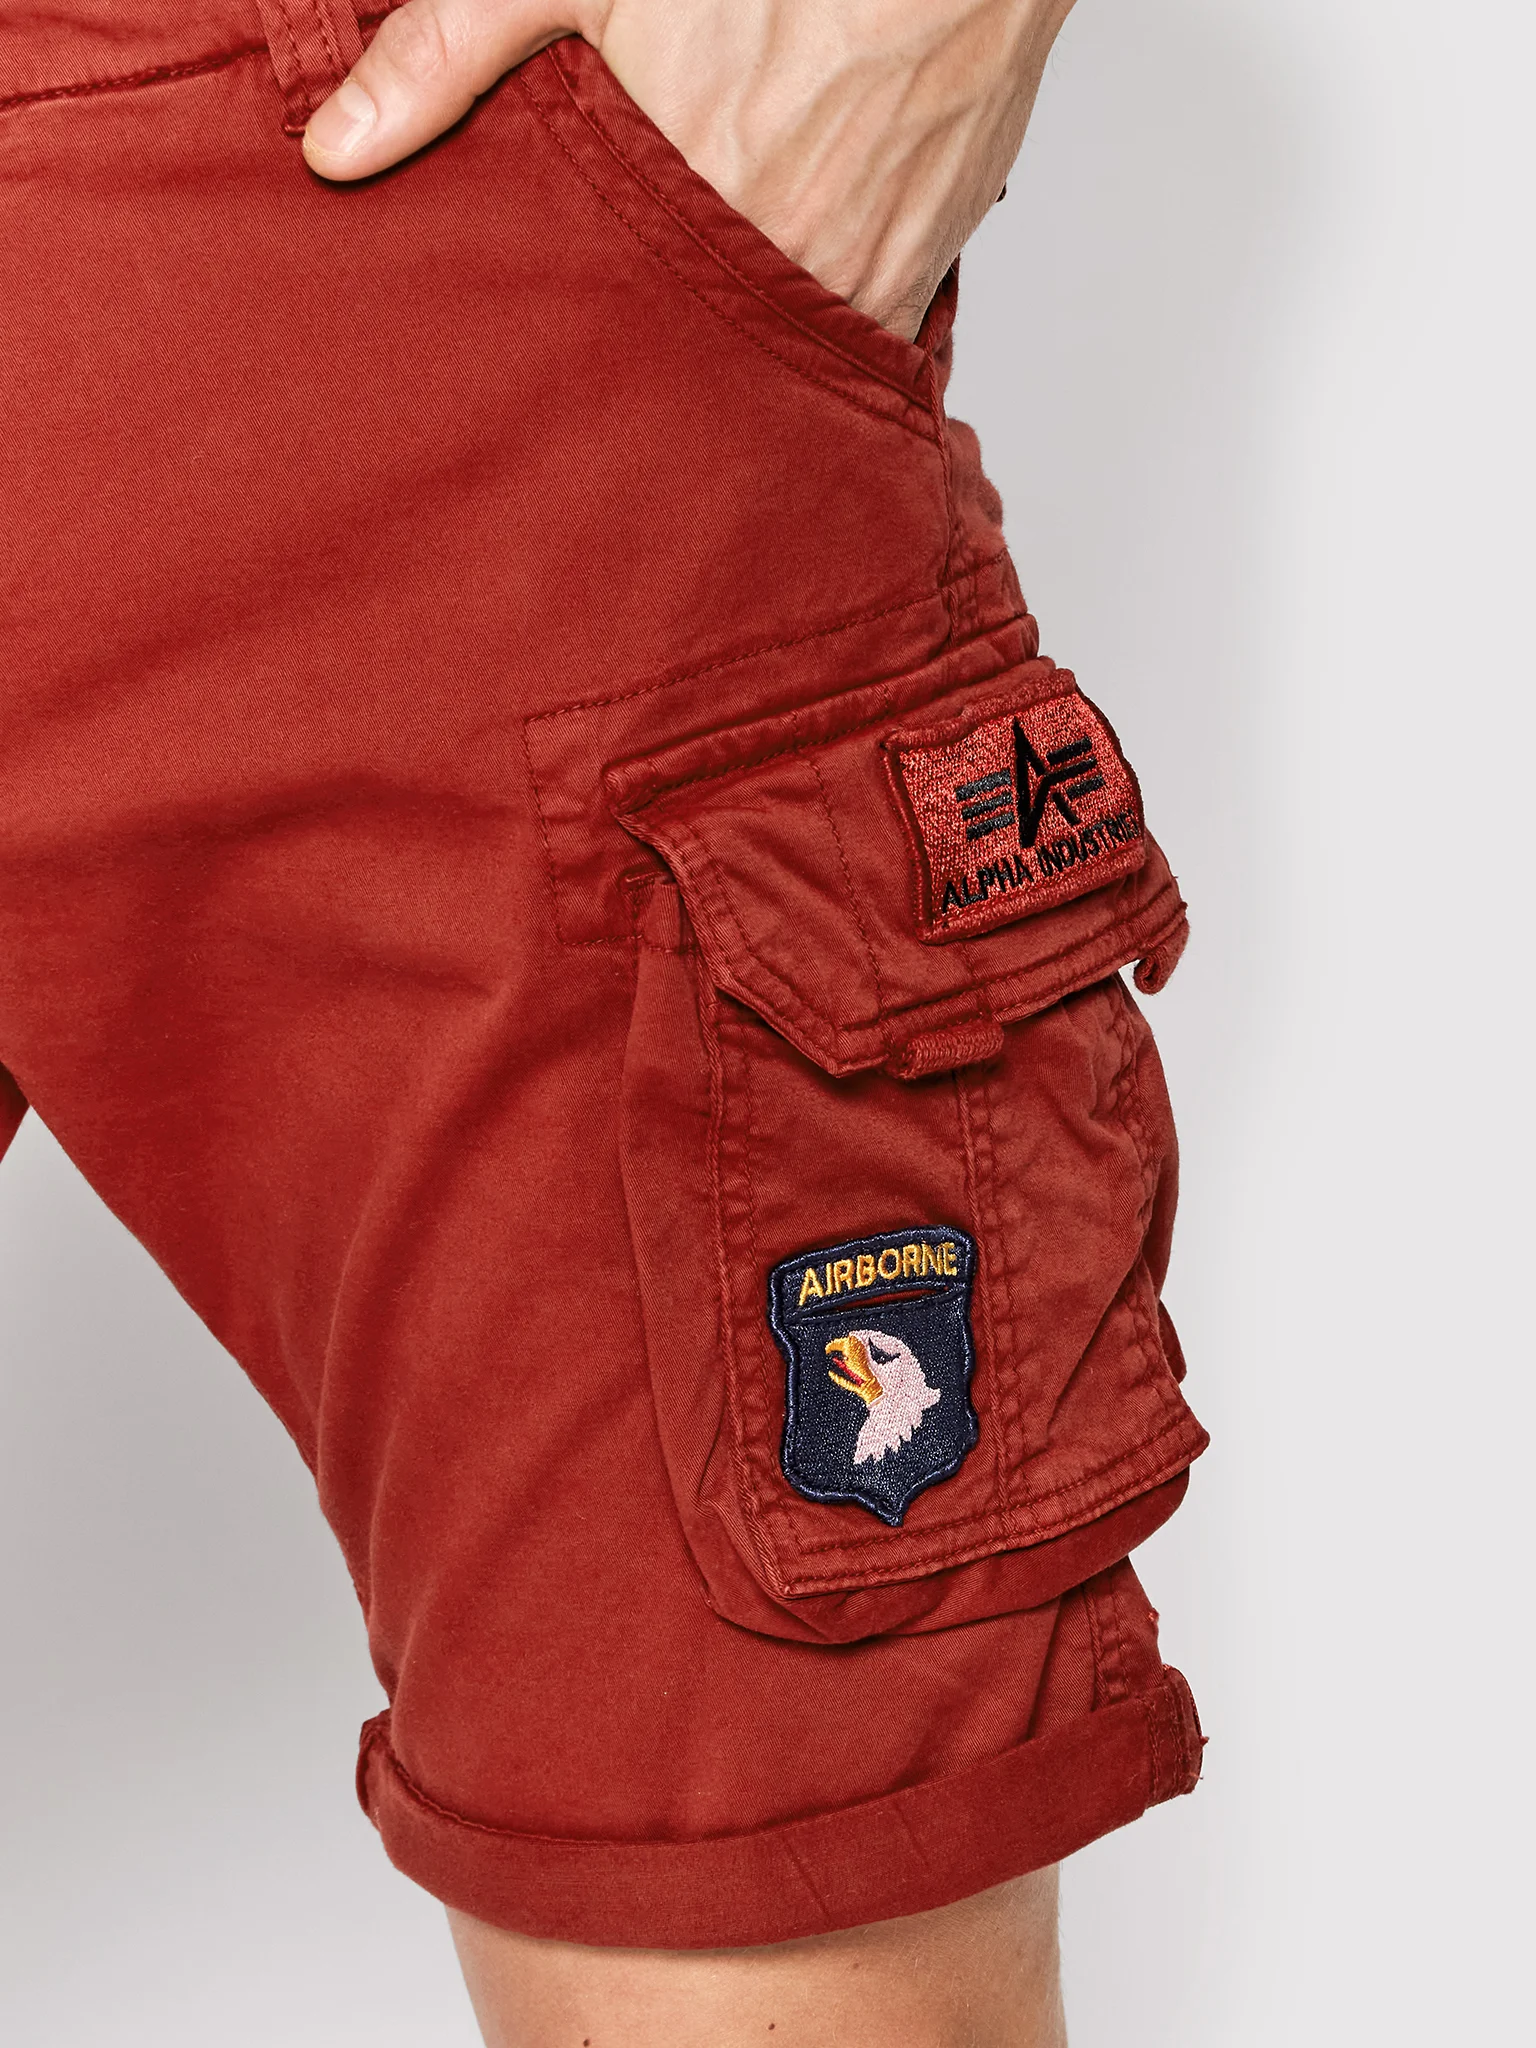 Crew Short Patch rbf red